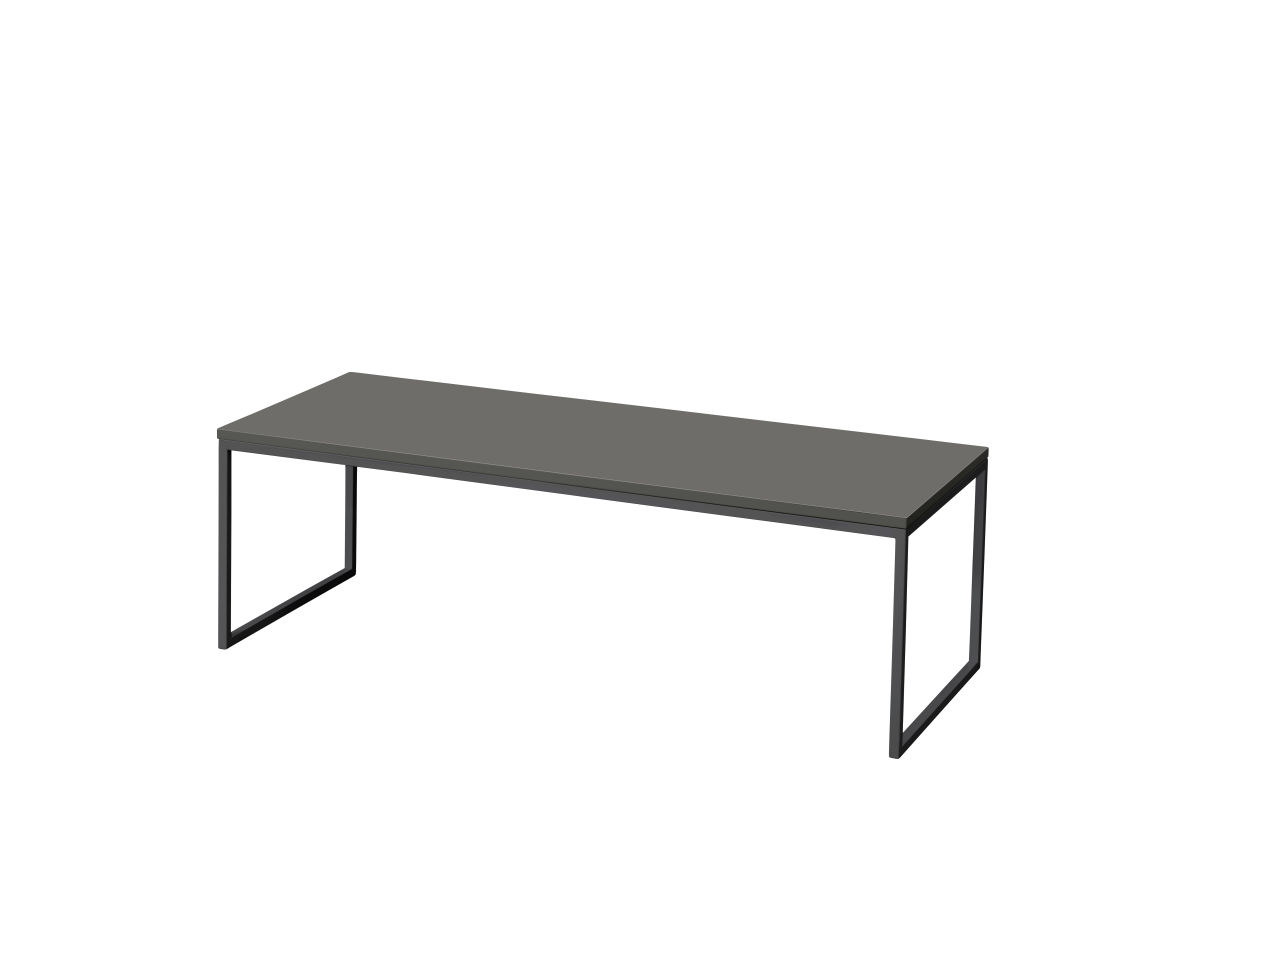 now! by hülsta. coffee tables | Couchtisch CT 17-1 | H: 33,8 cm | B: 105,8 cm | T: 41,7 cm